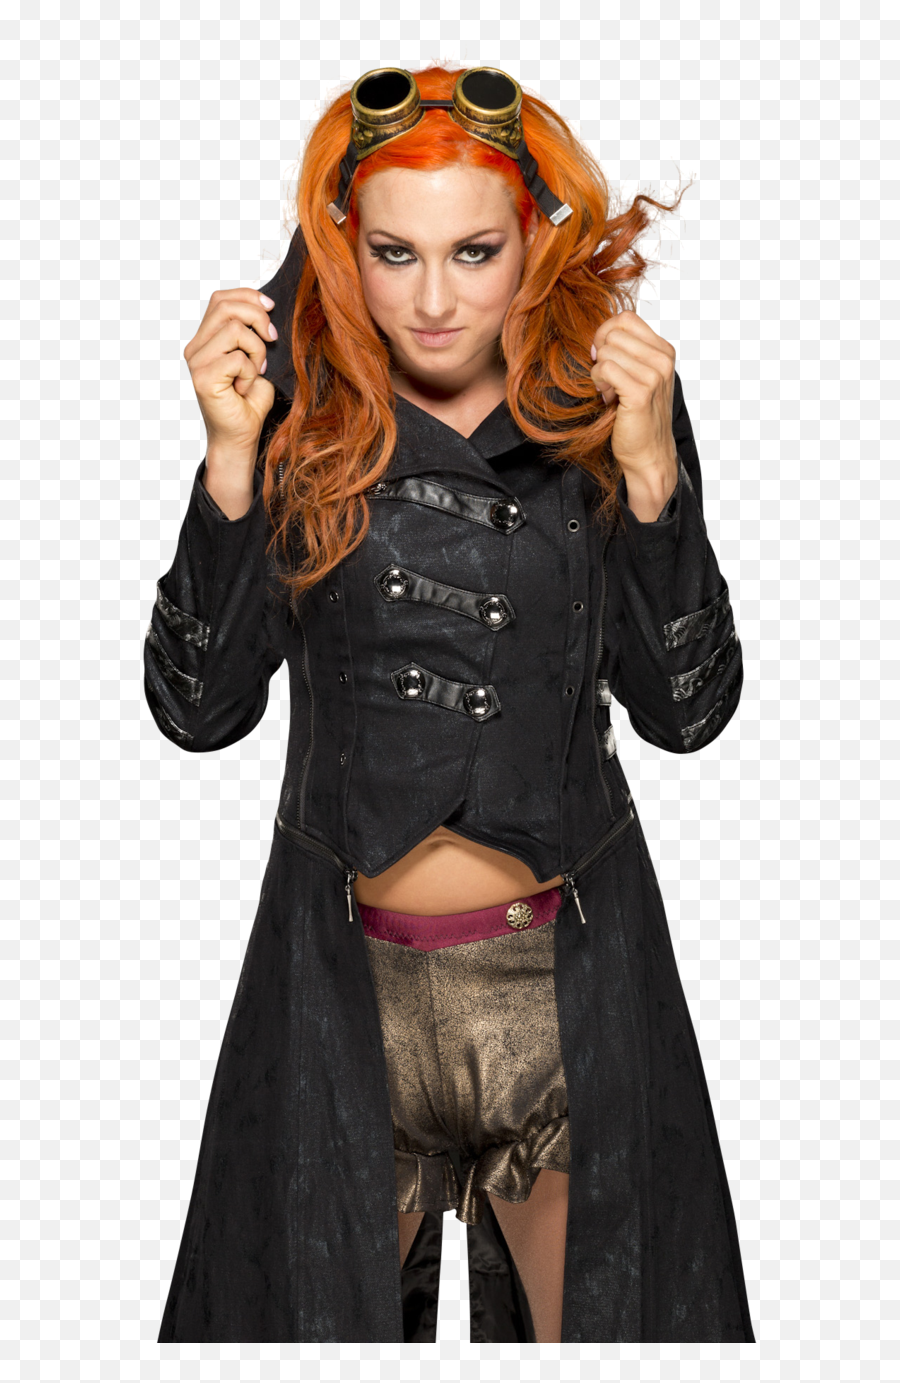 For Rhm Becky Lynch - Becky Lynch Wallpaper For Iphone Png,Becky Lynch Png